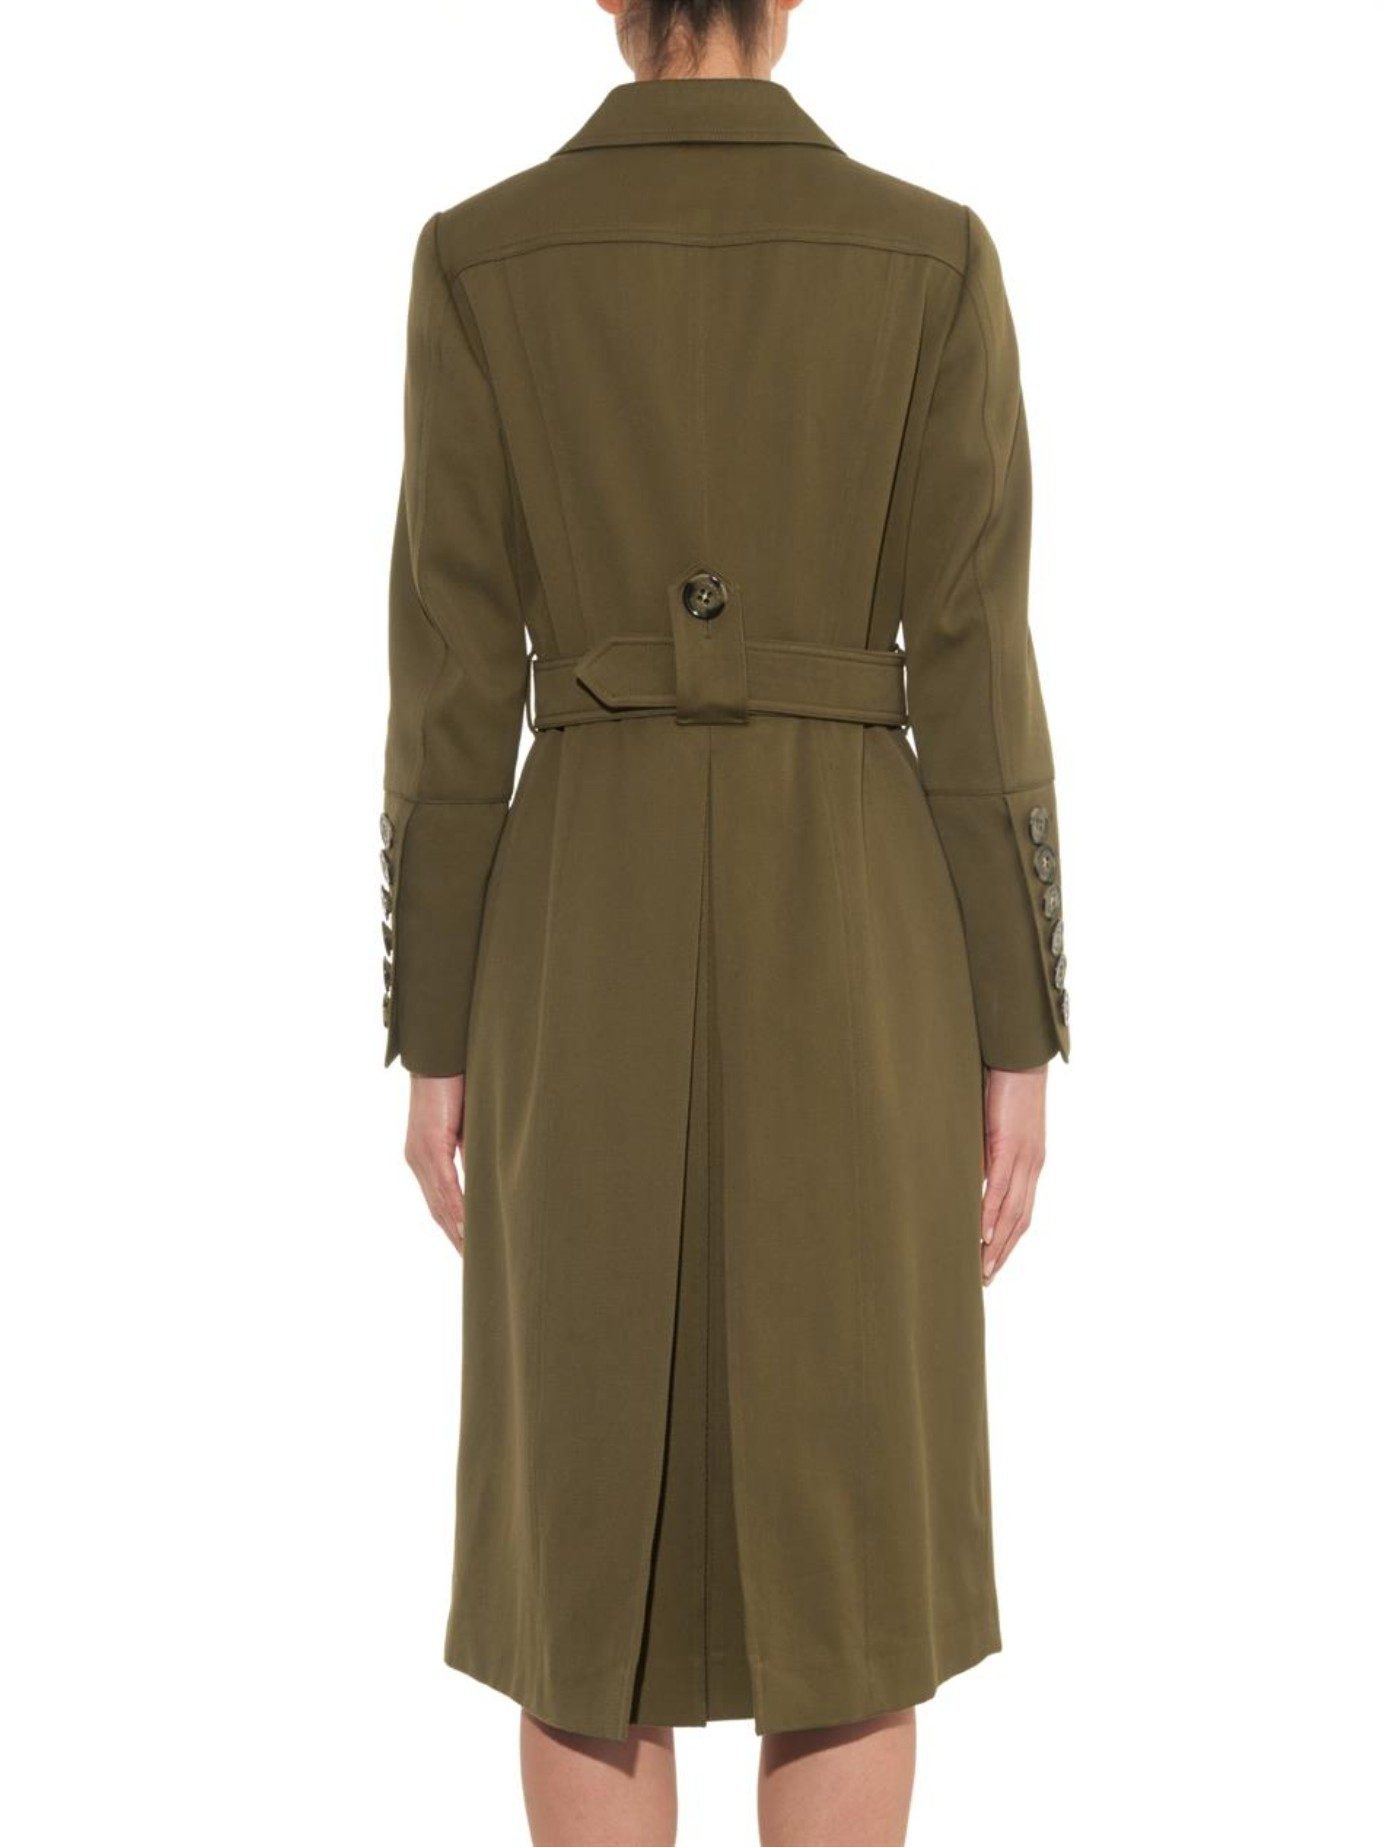 Burberry prorsum Cotton-Twill Trench Coat in Natural | Lyst